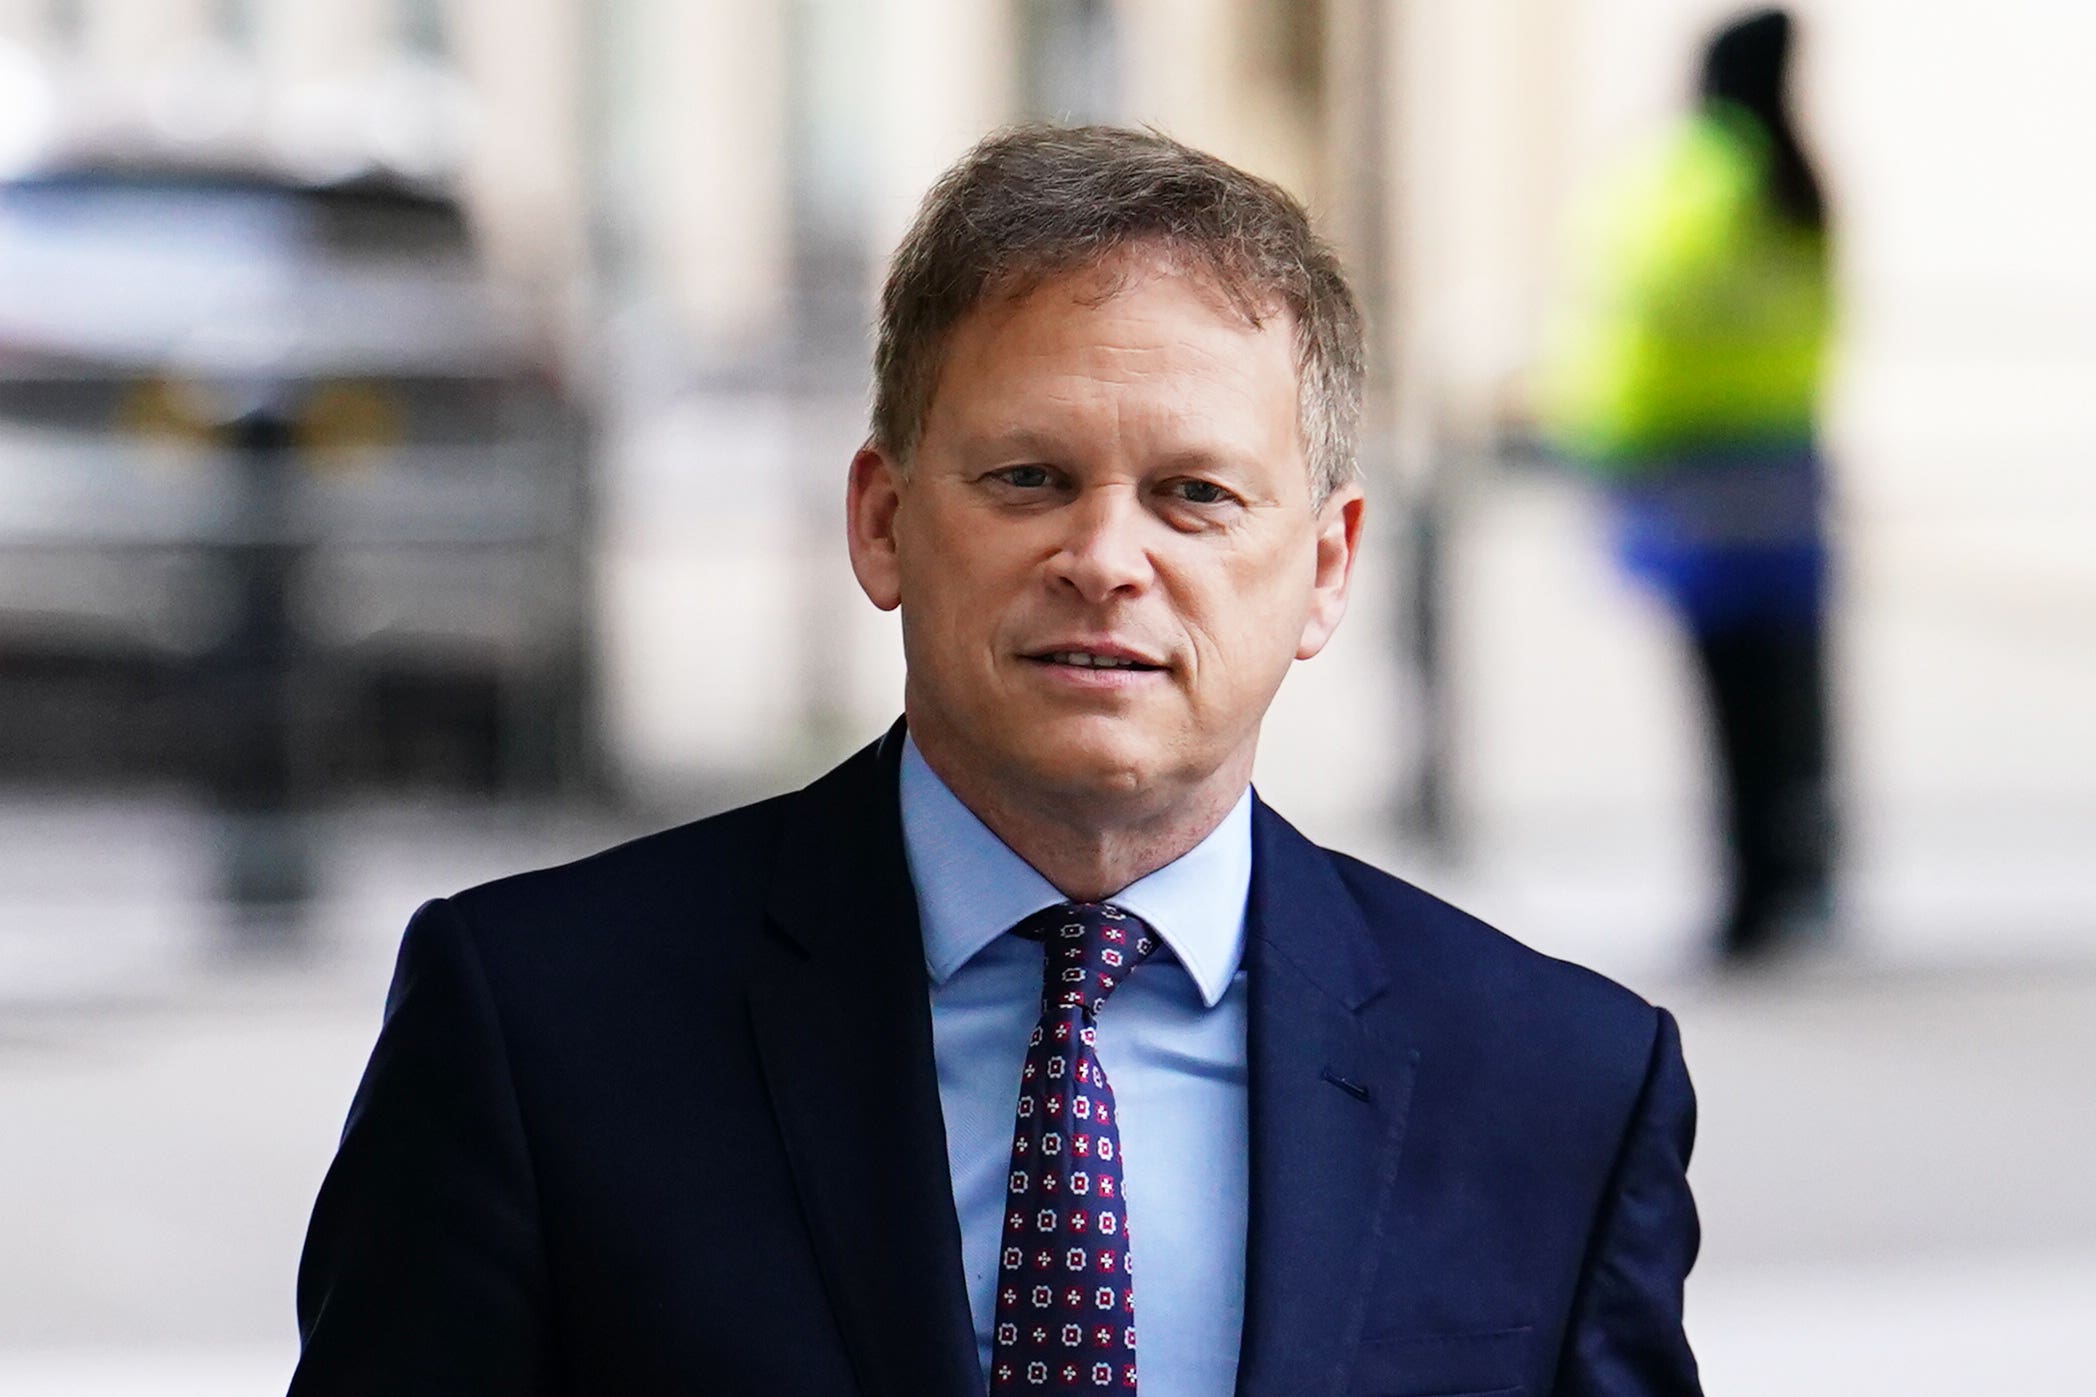 Grant Shapps ‘galvanised’ rail workers into continuing with strike action when he was transport secretary through ‘noisy political rhetoric’, the boss of Network Rail has suggested (Jordan Pettitt/PA)